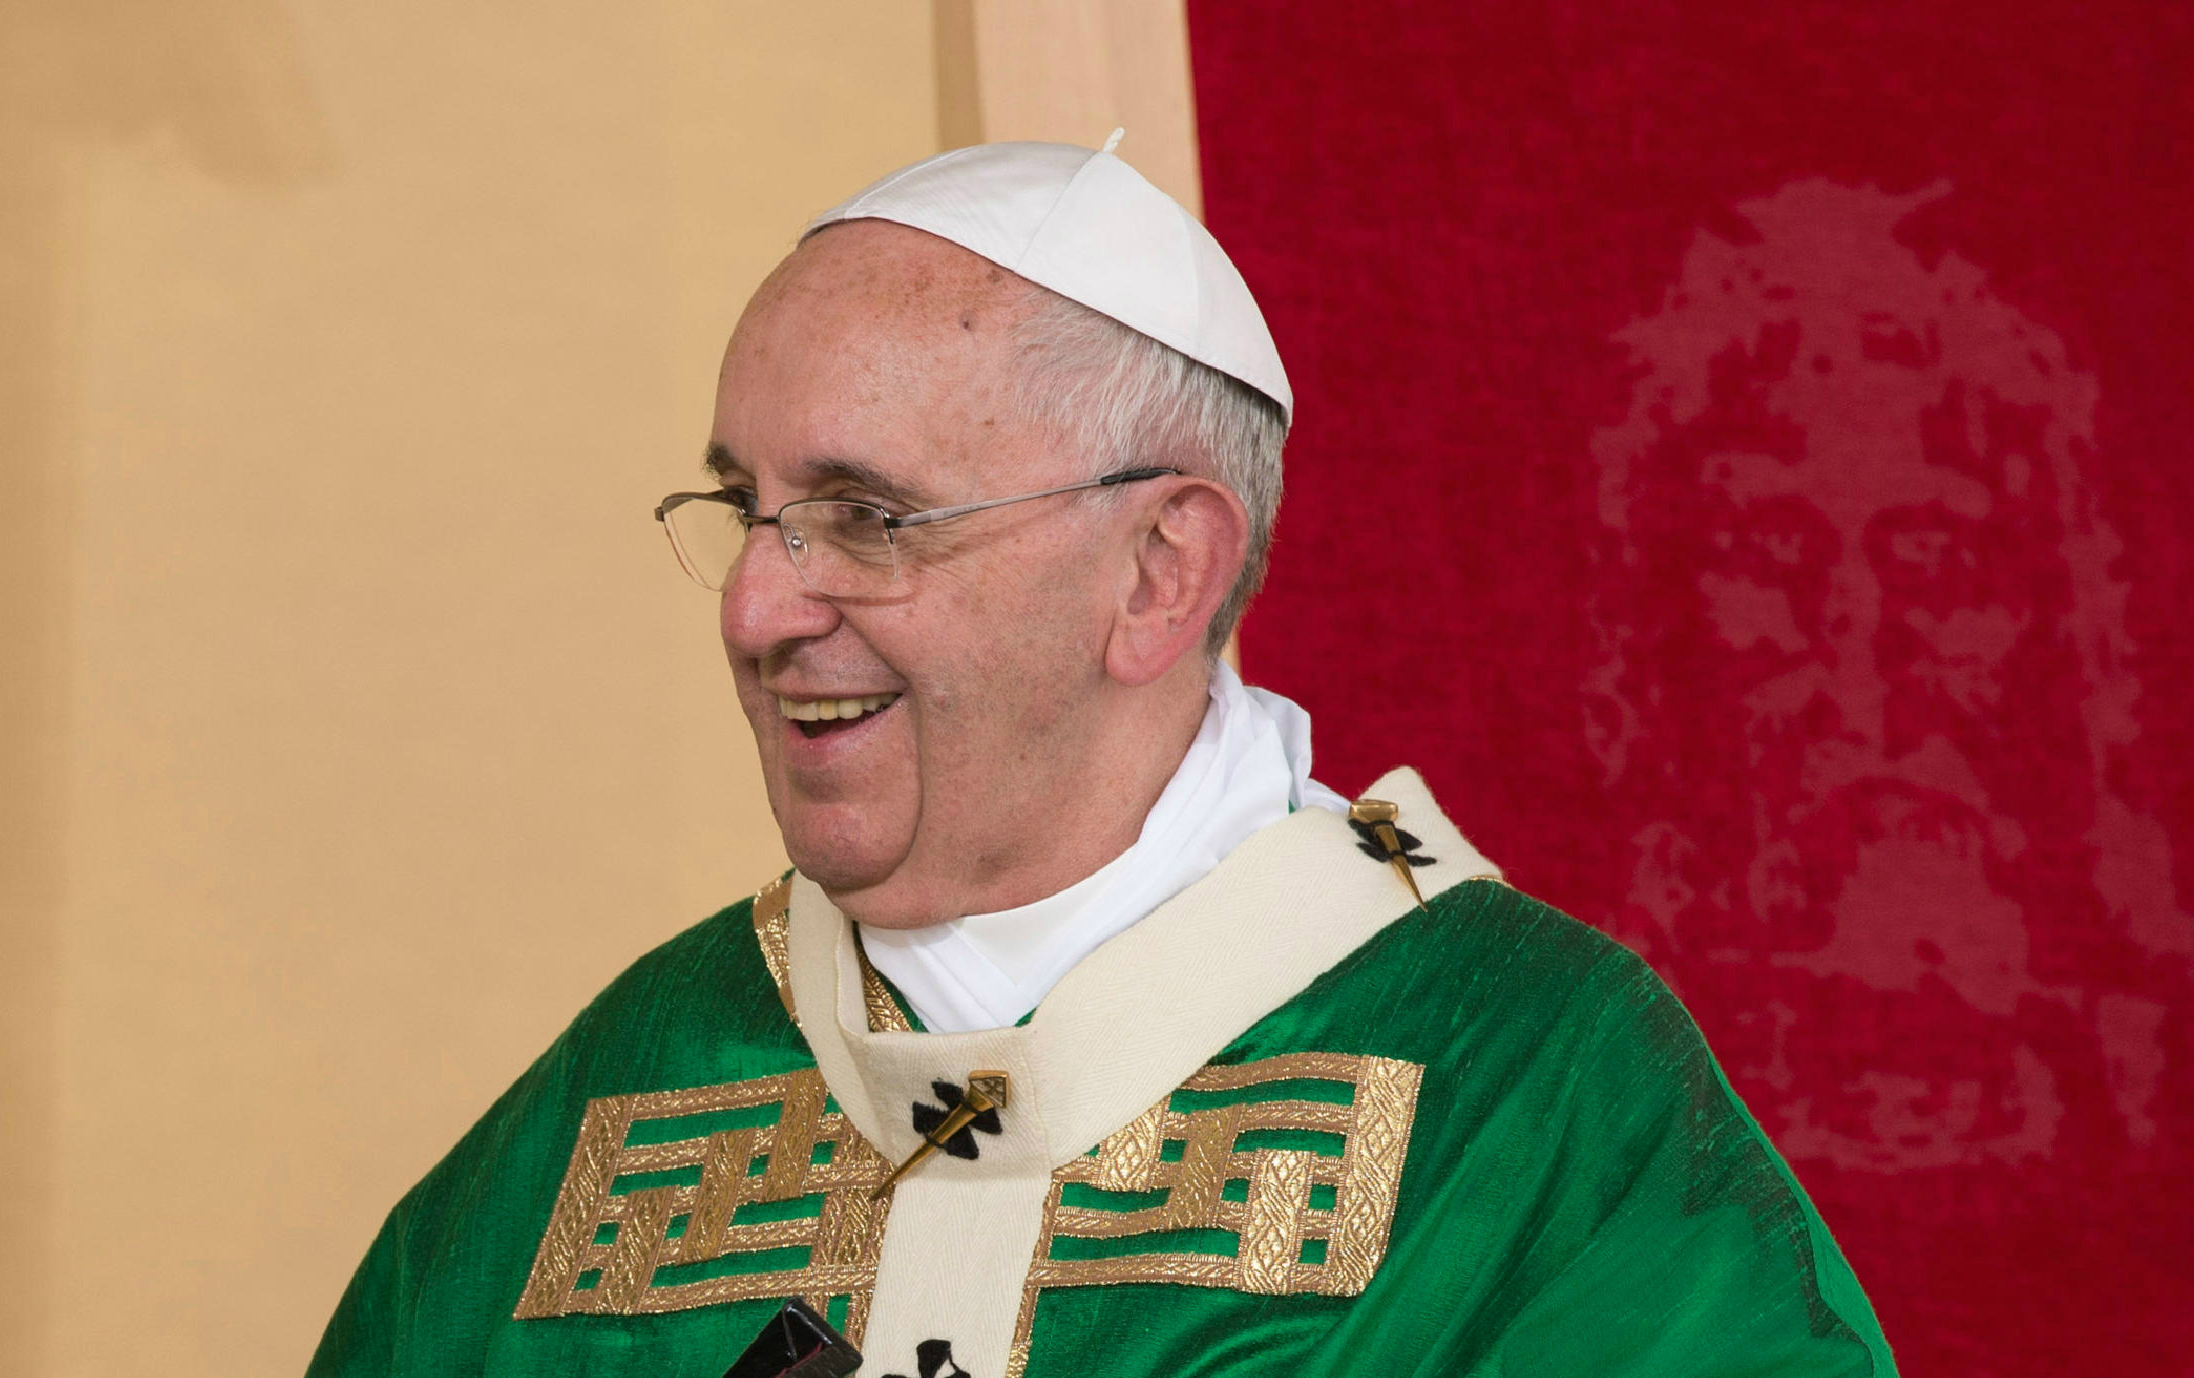 Pope Francis during his apostolic visit in Turin